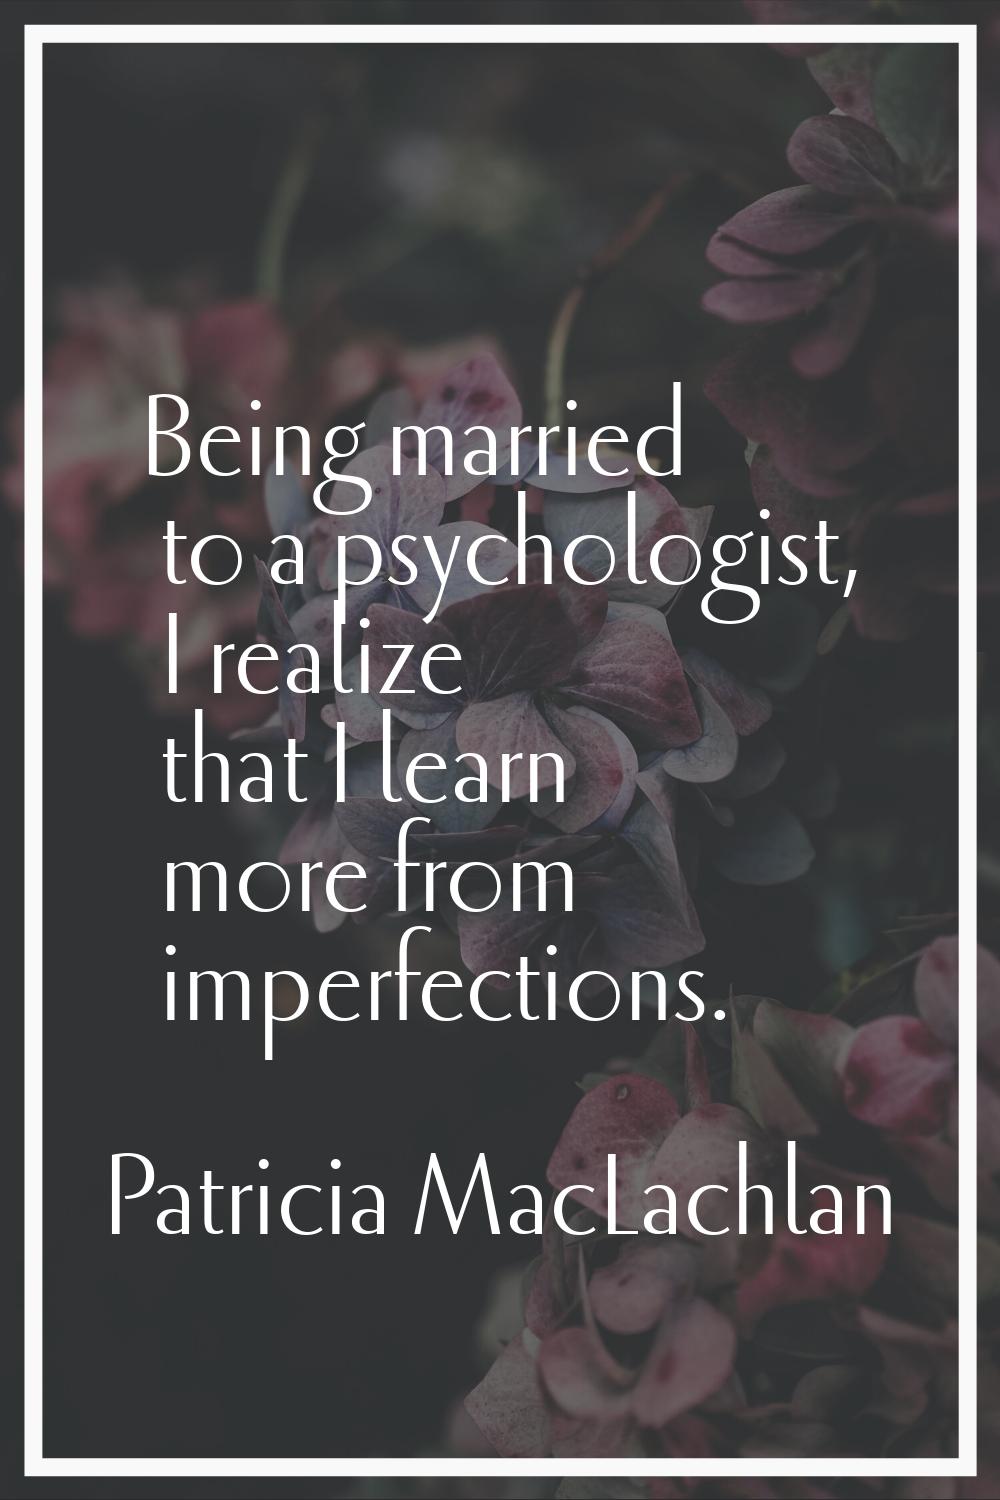 Being married to a psychologist, I realize that I learn more from imperfections.